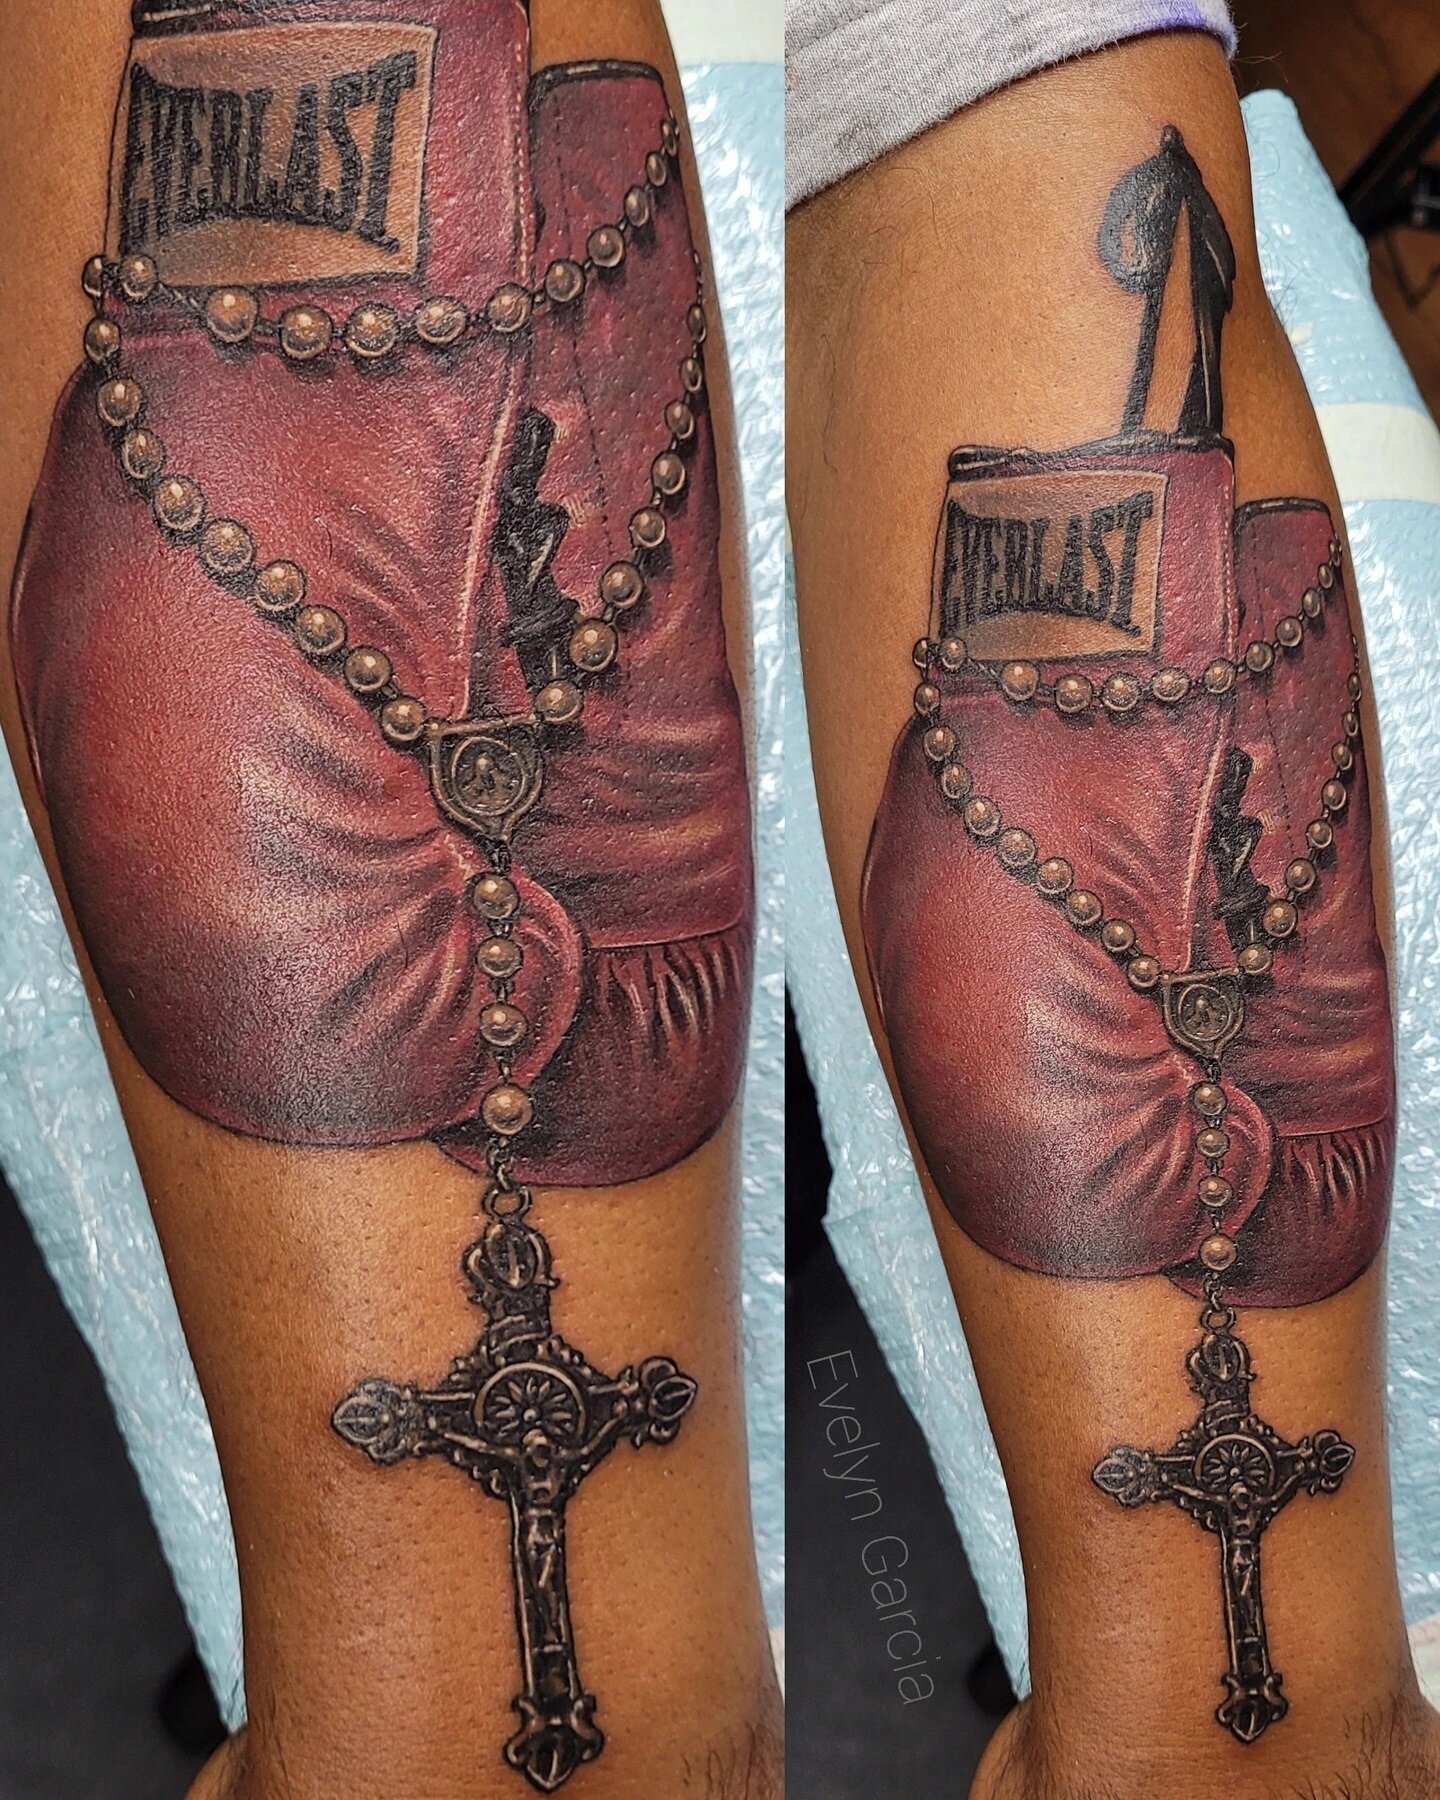 Boxing Gloves done by Mike McCaskill  Elizabeth St Tattoo Riverside CA   rtraditionaltattoos